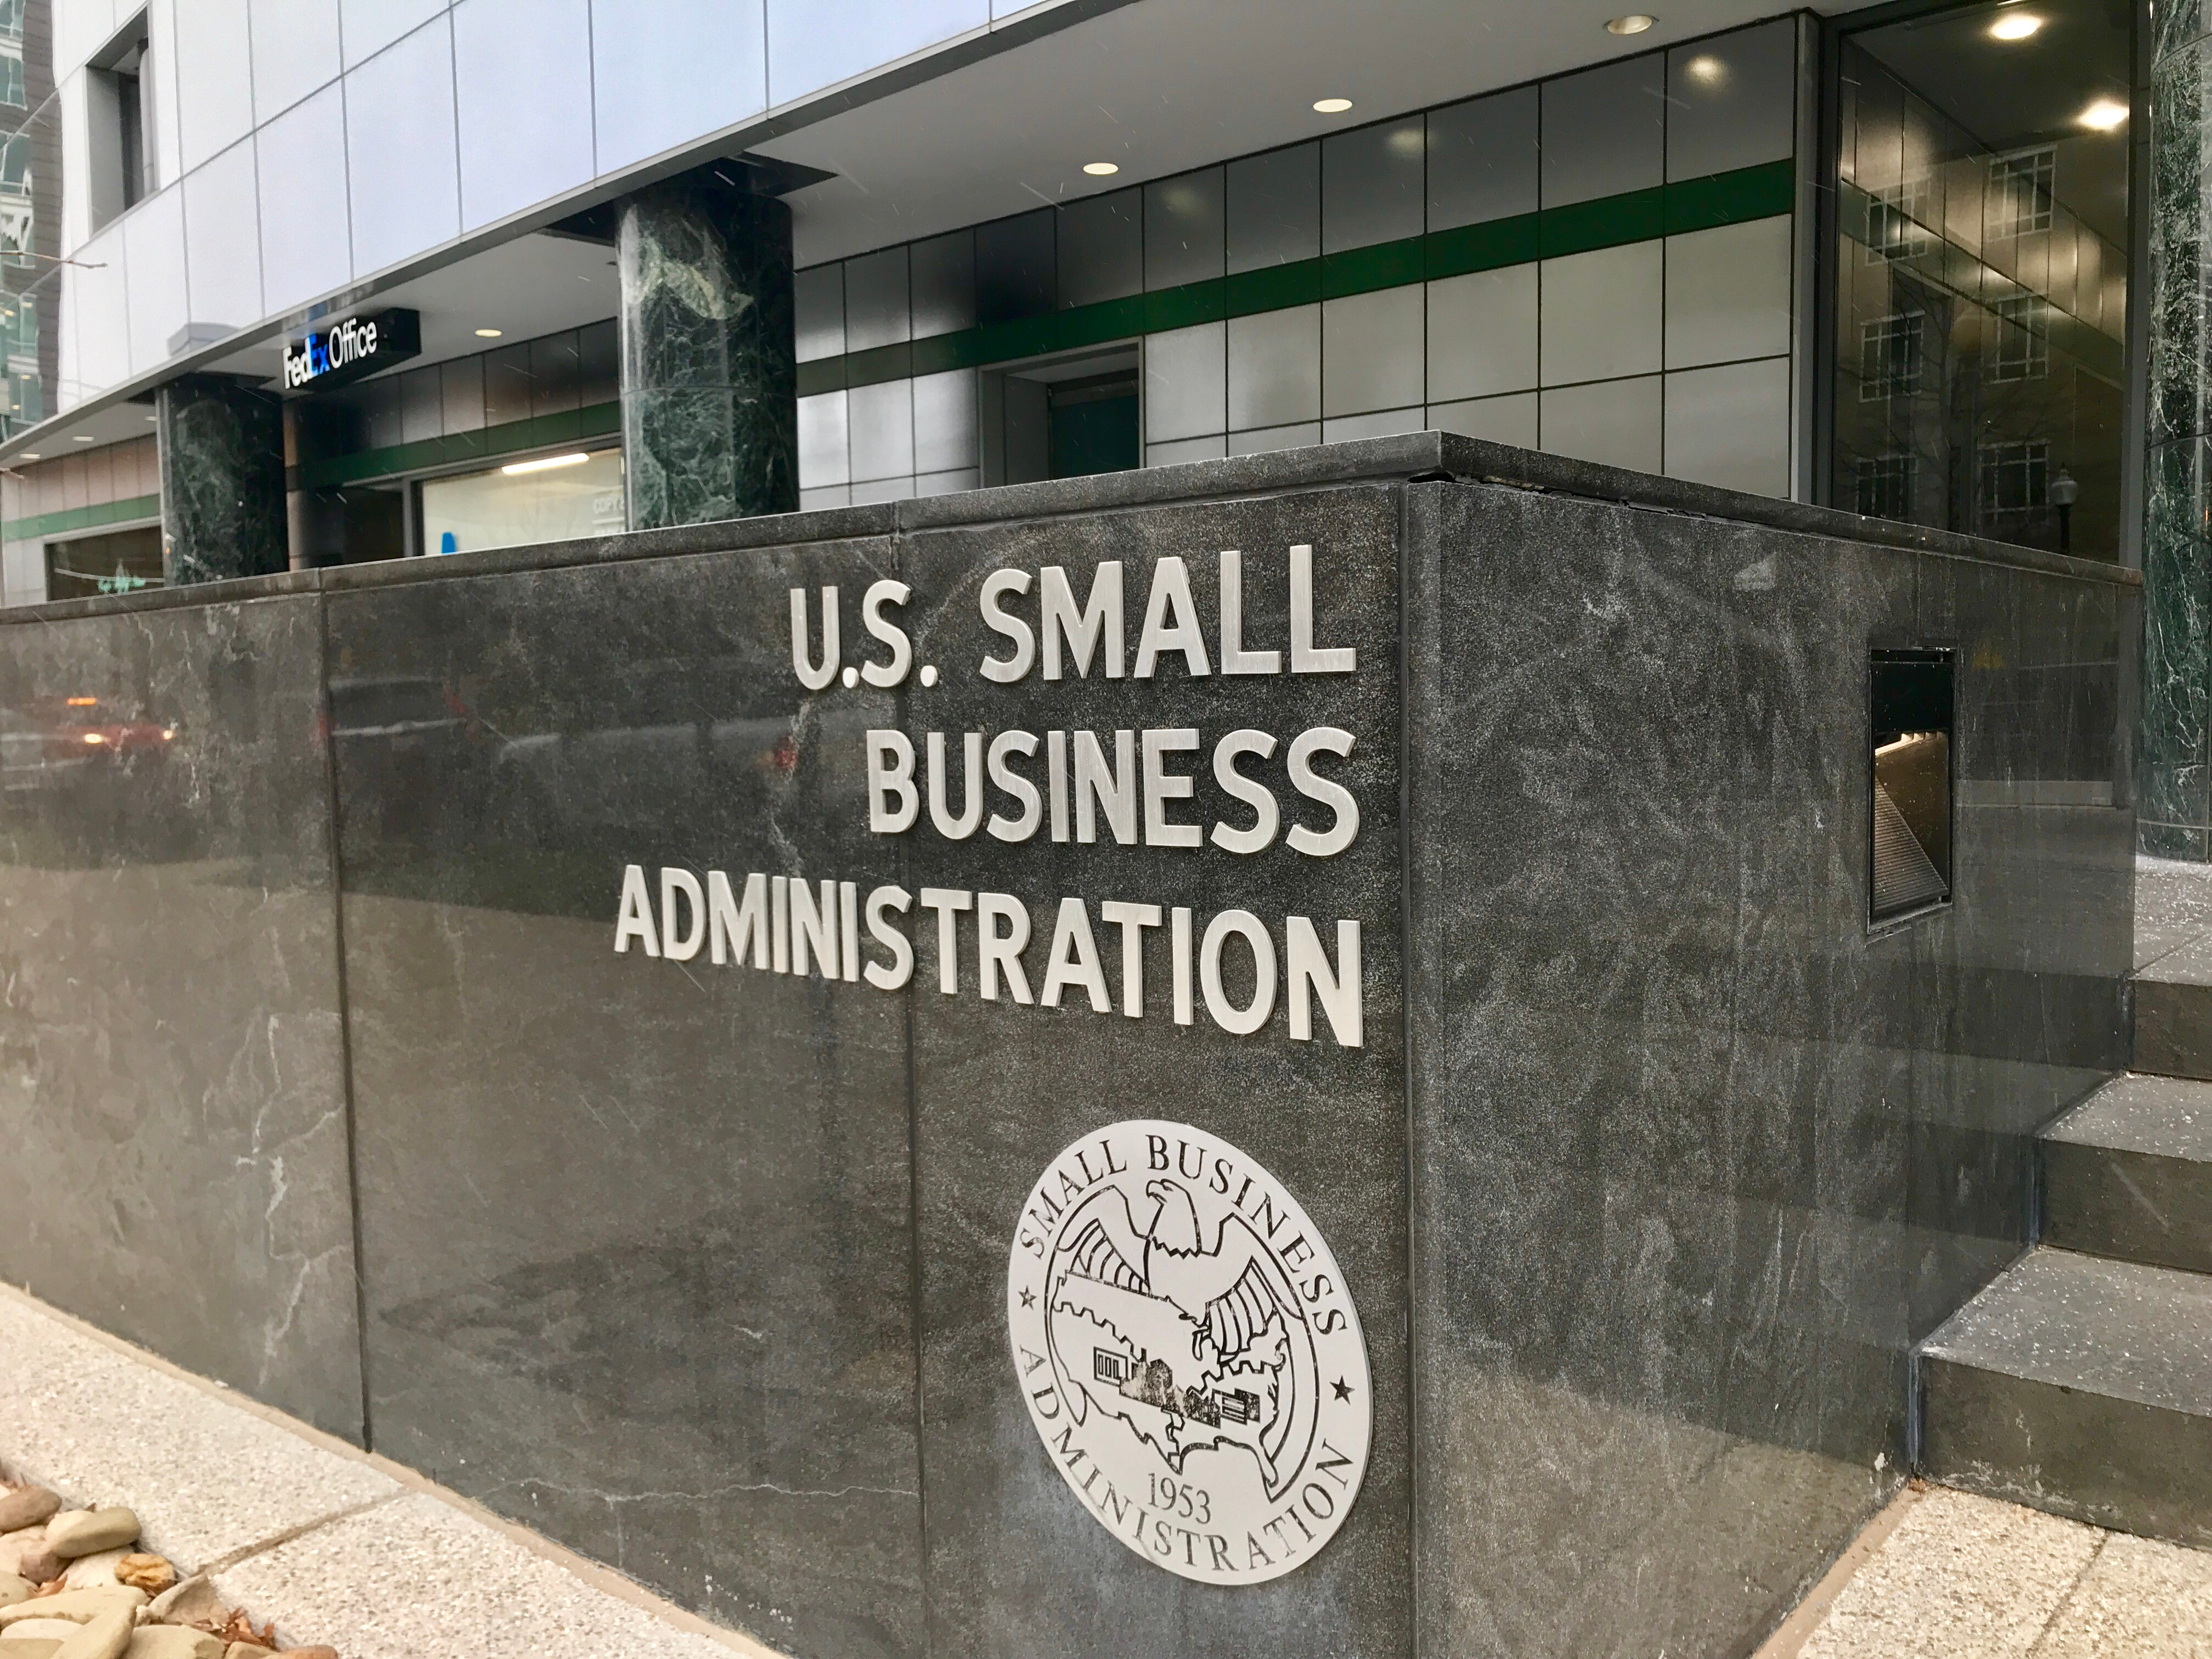 How to account for small business interests in President Biden’s Modernizing Regulatory Review Initiative